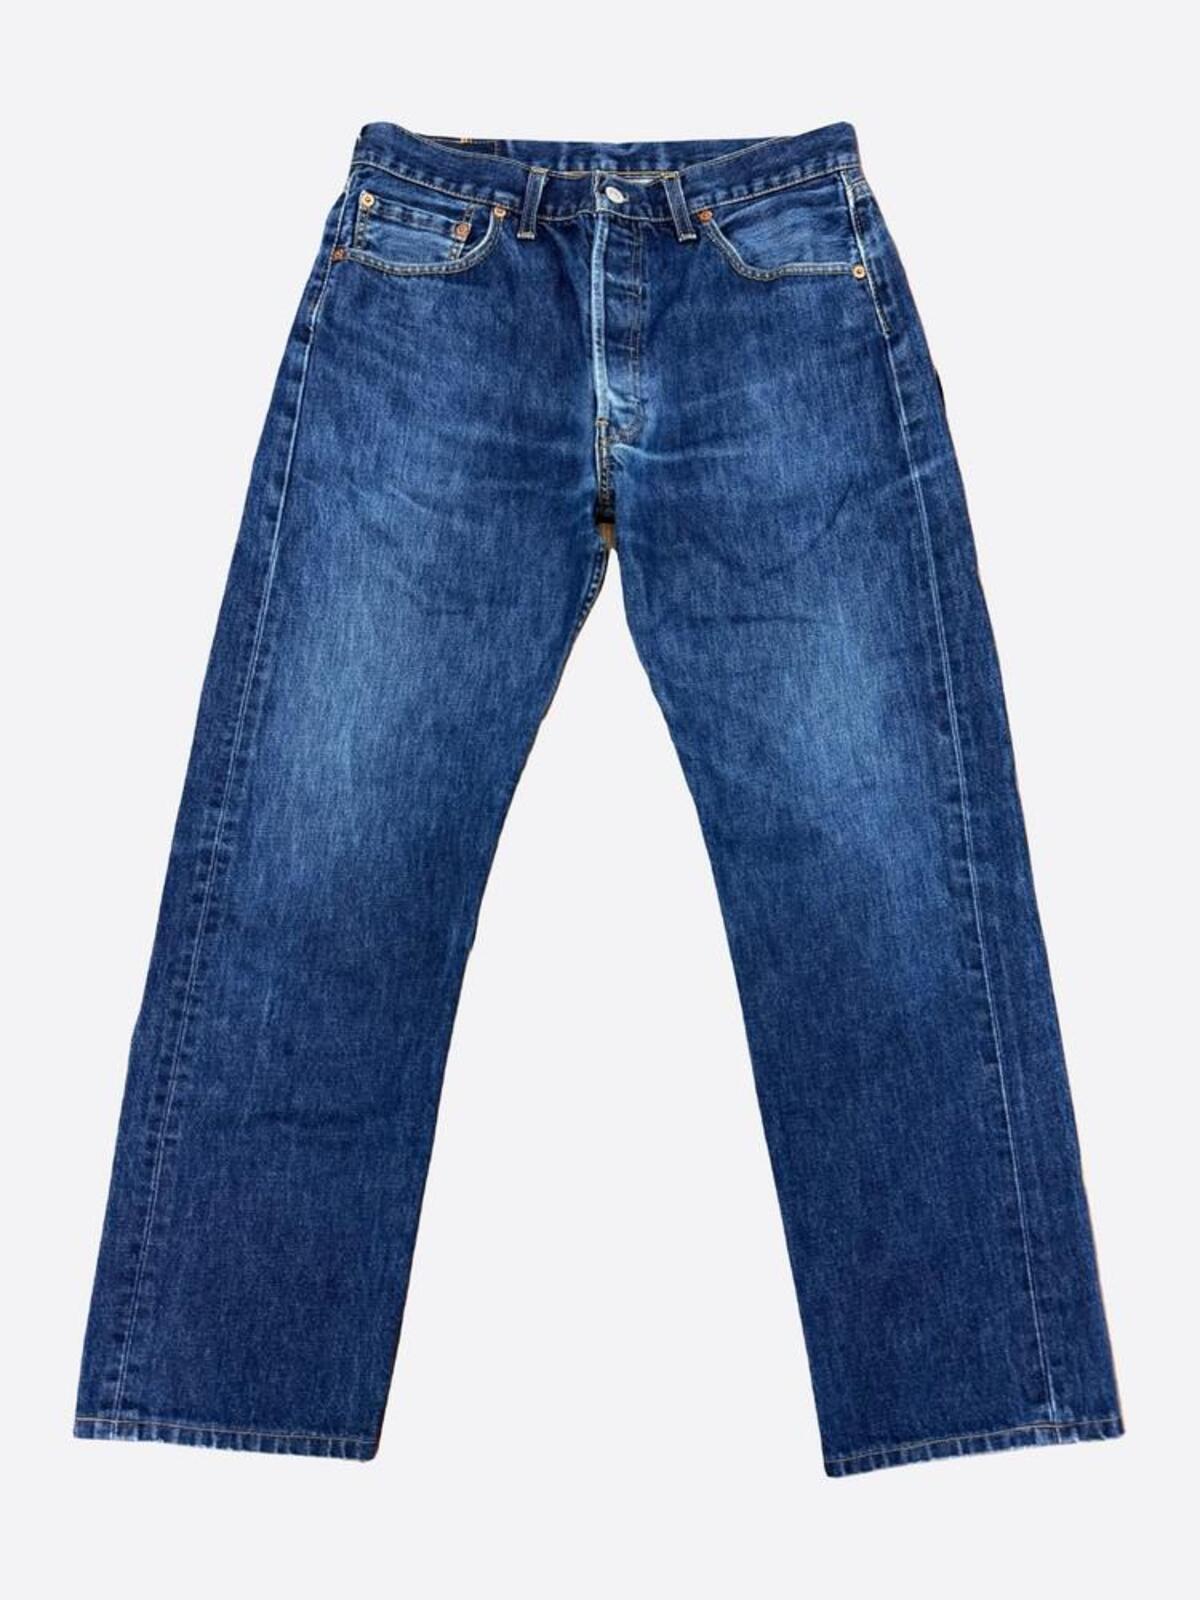 2001 501 Blue Jeans Belgium Made (32inch)